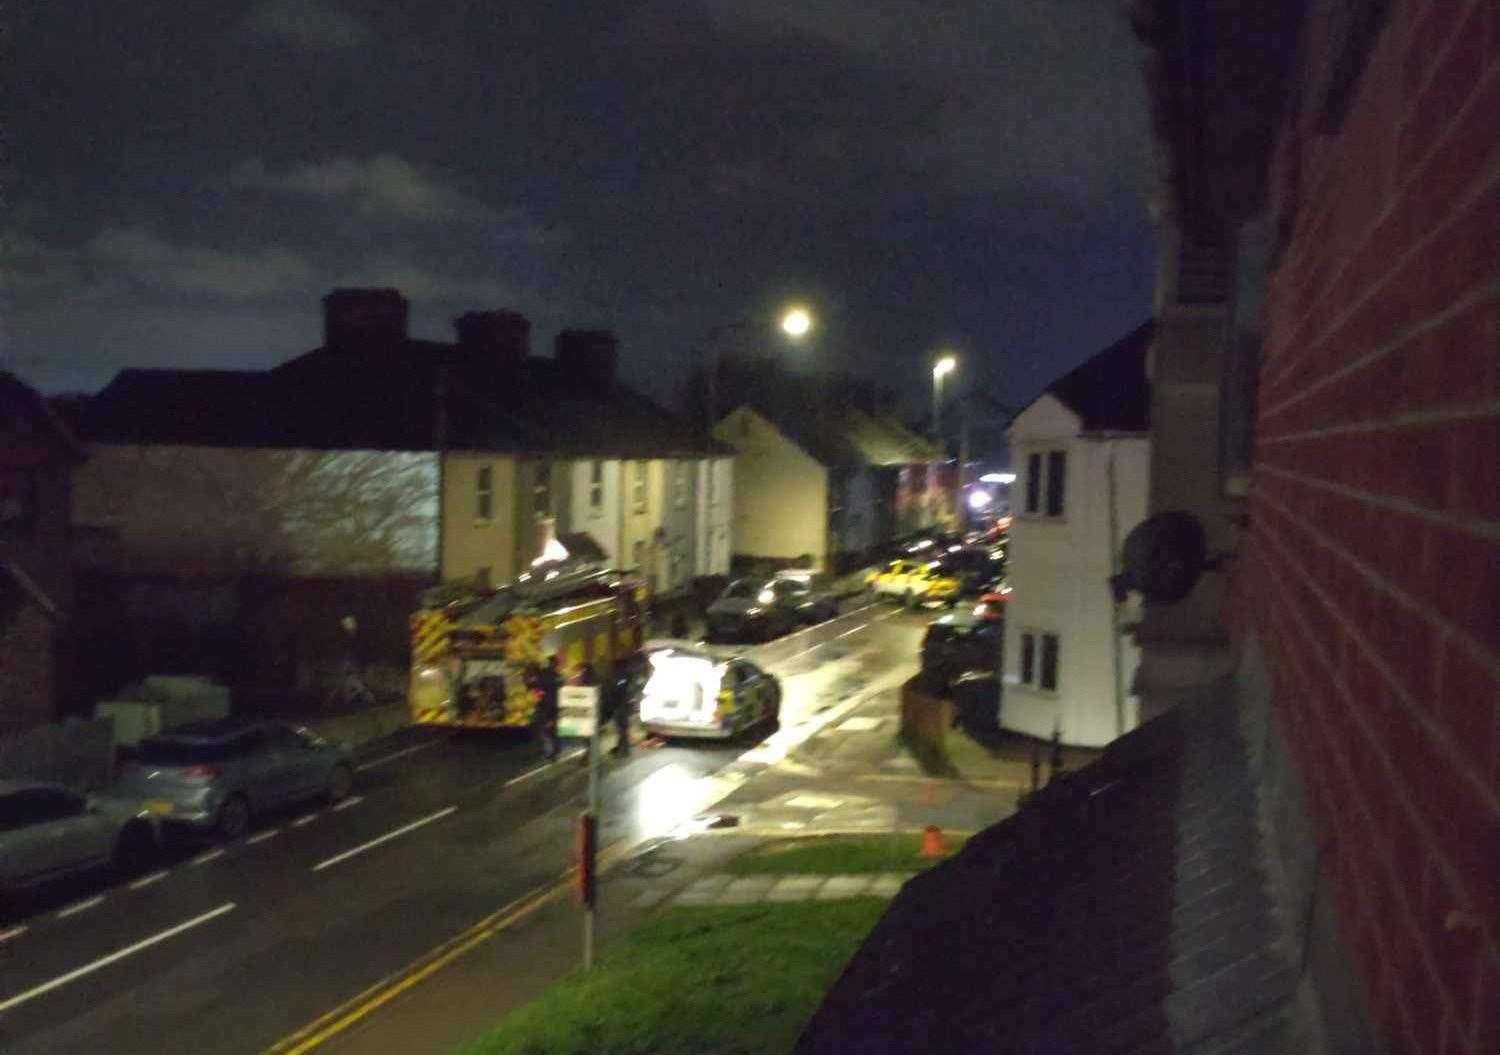 Parts of Holborough Road were closed. Picture: Bam Savage